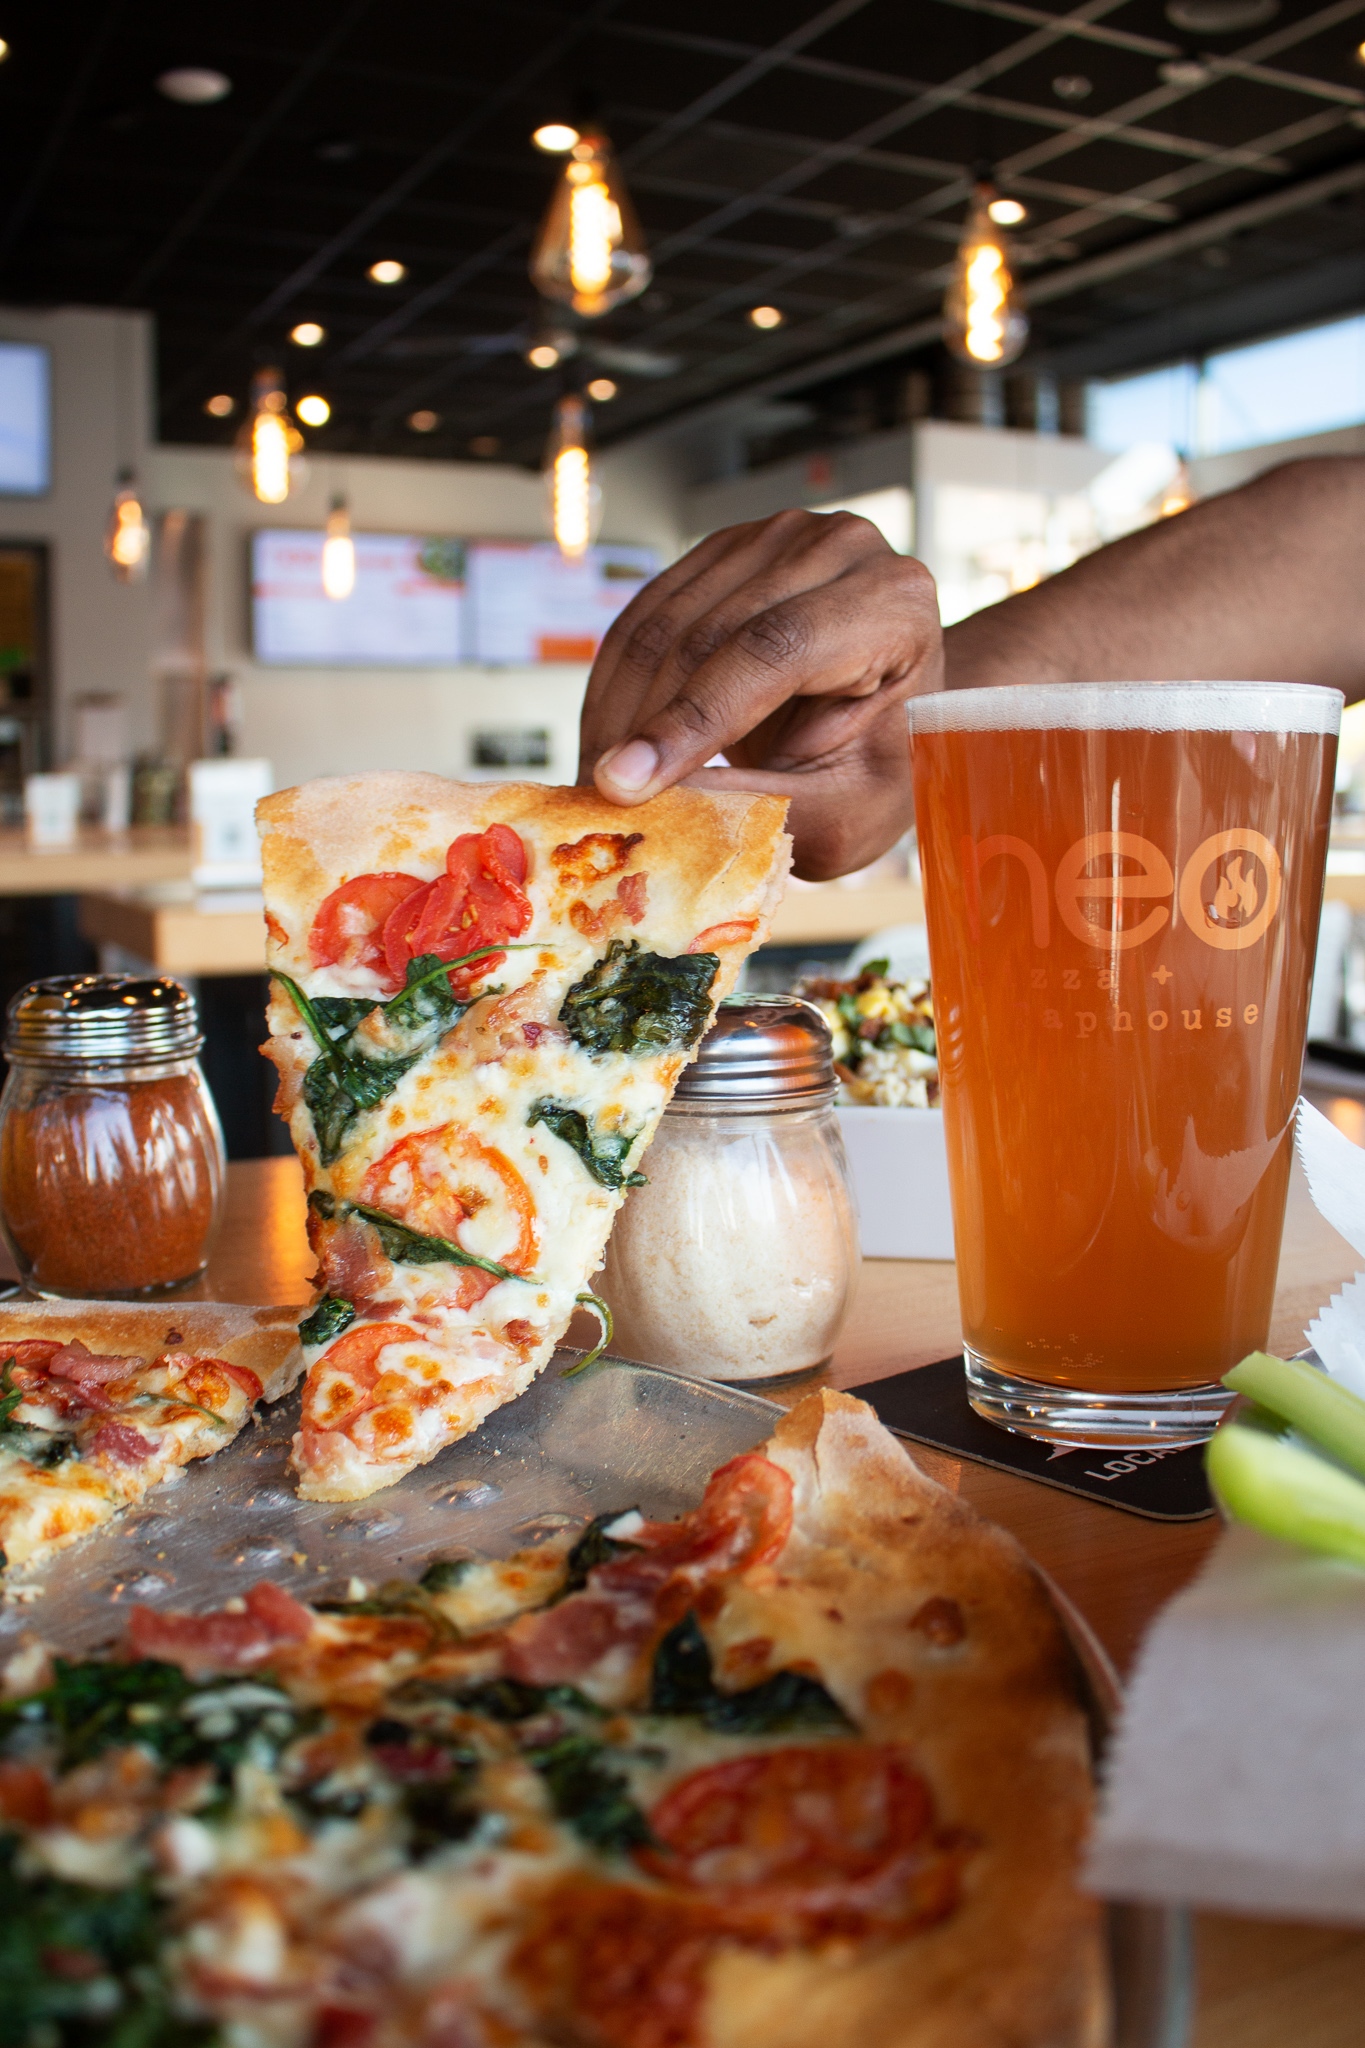 A hand picking up a slice of pizza with a glass of beer on the table